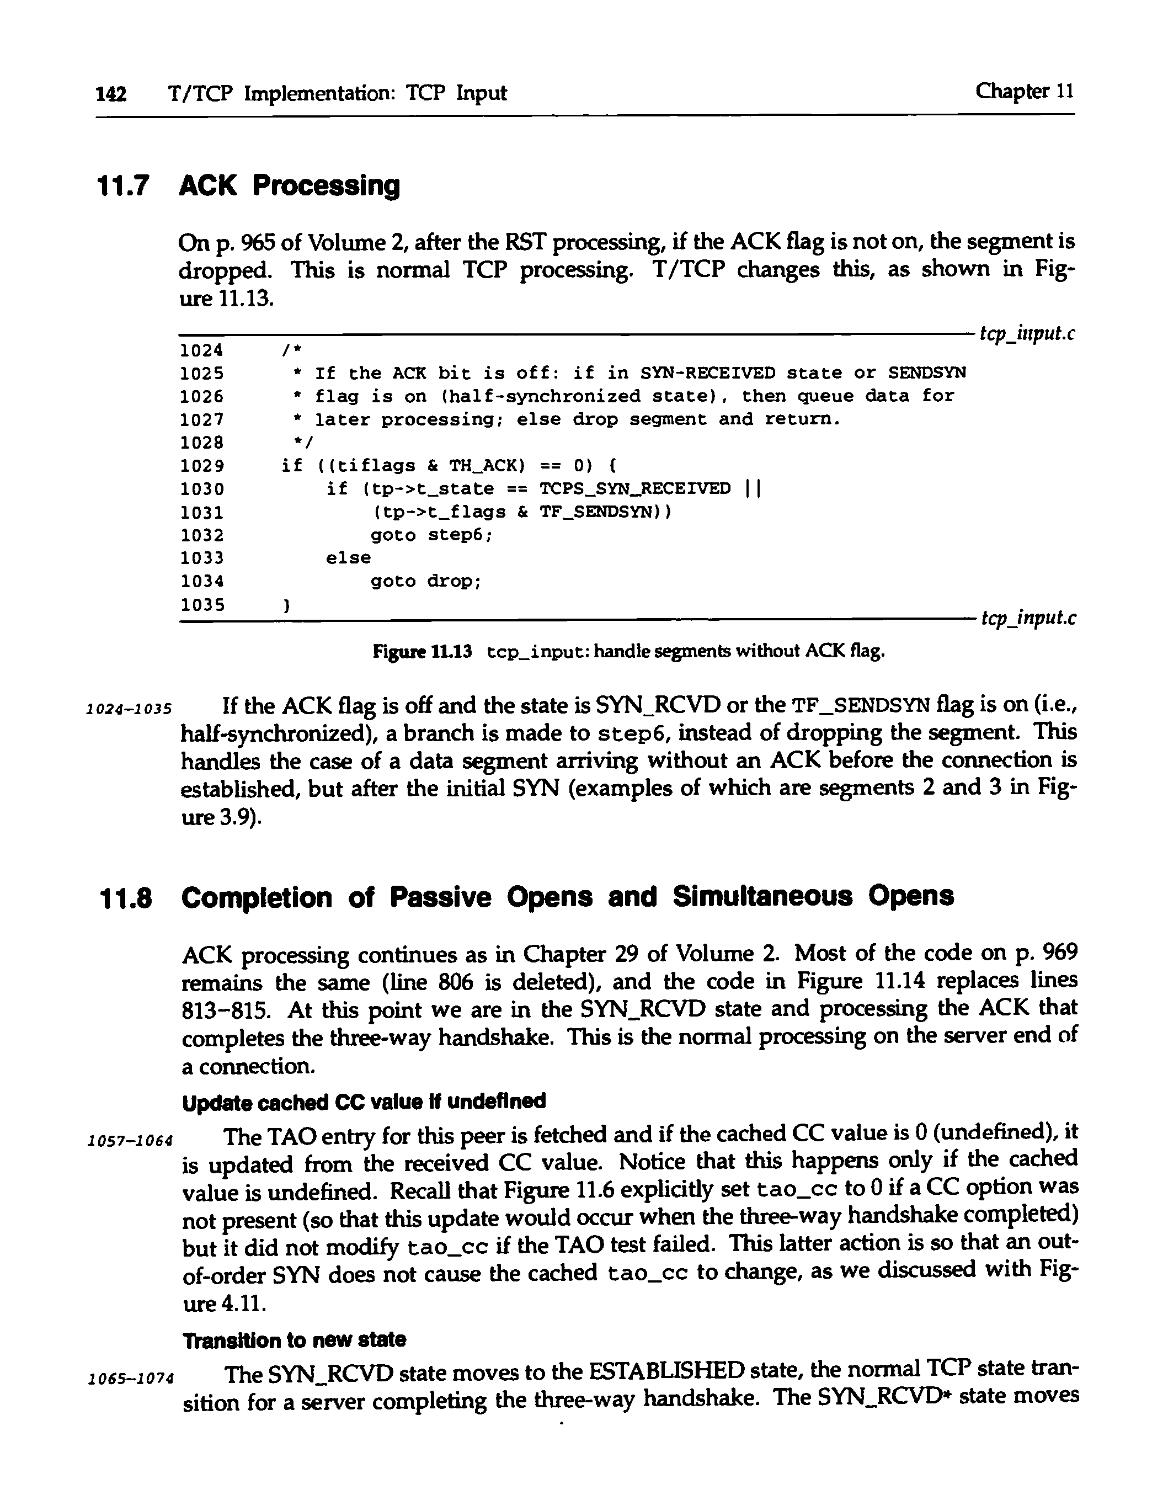 11.7 ACK Processing
11.8 Completion of Passive Opens and Simultaneous Opens